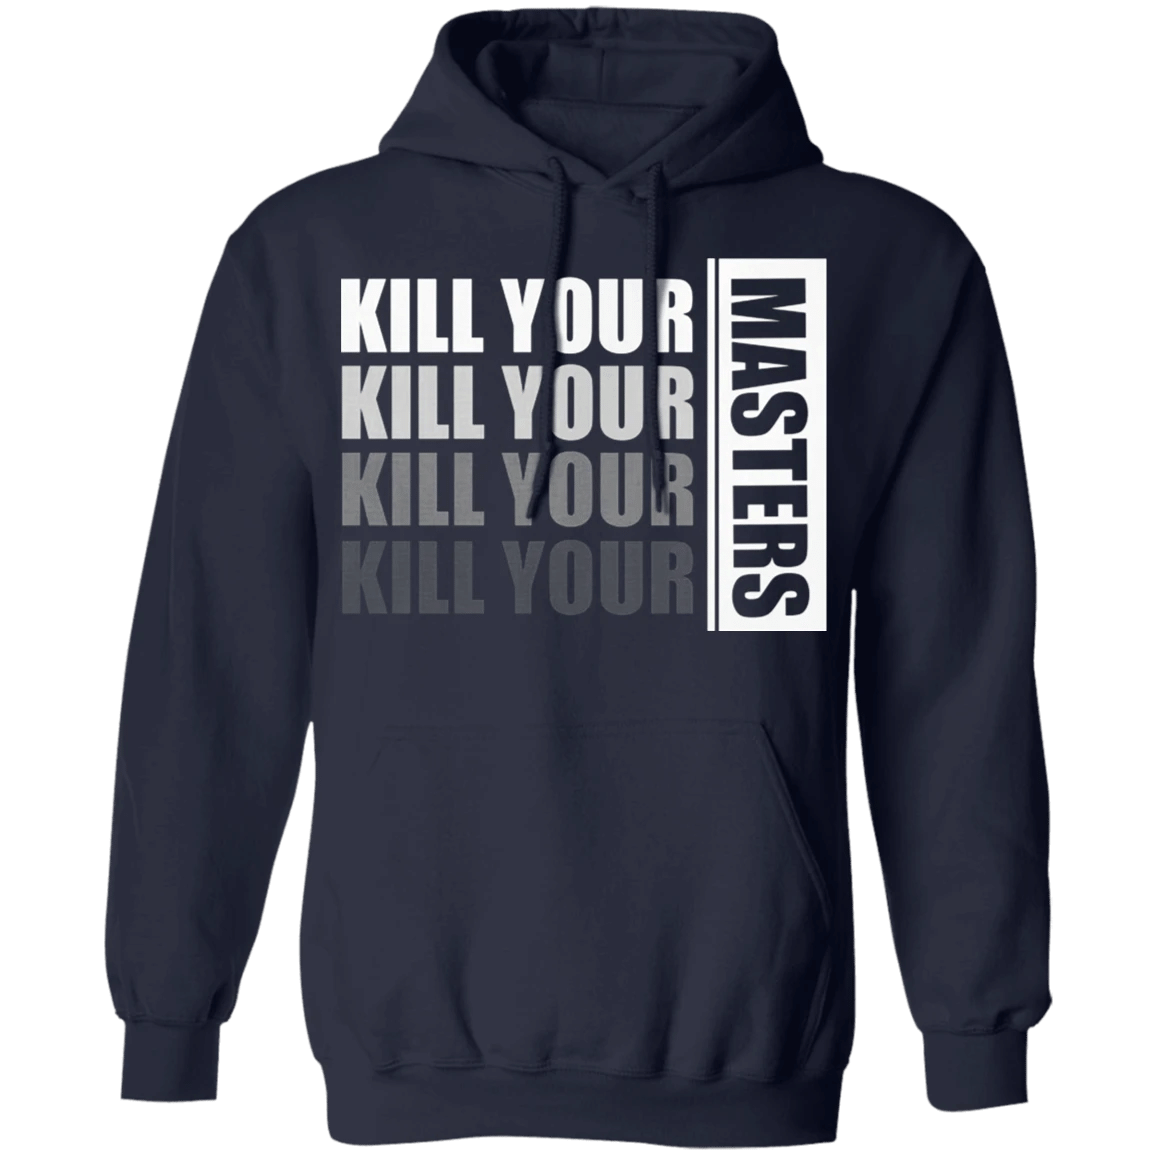 Kill Your Masters Shirt Justice For George Floyd Hoodie Blm